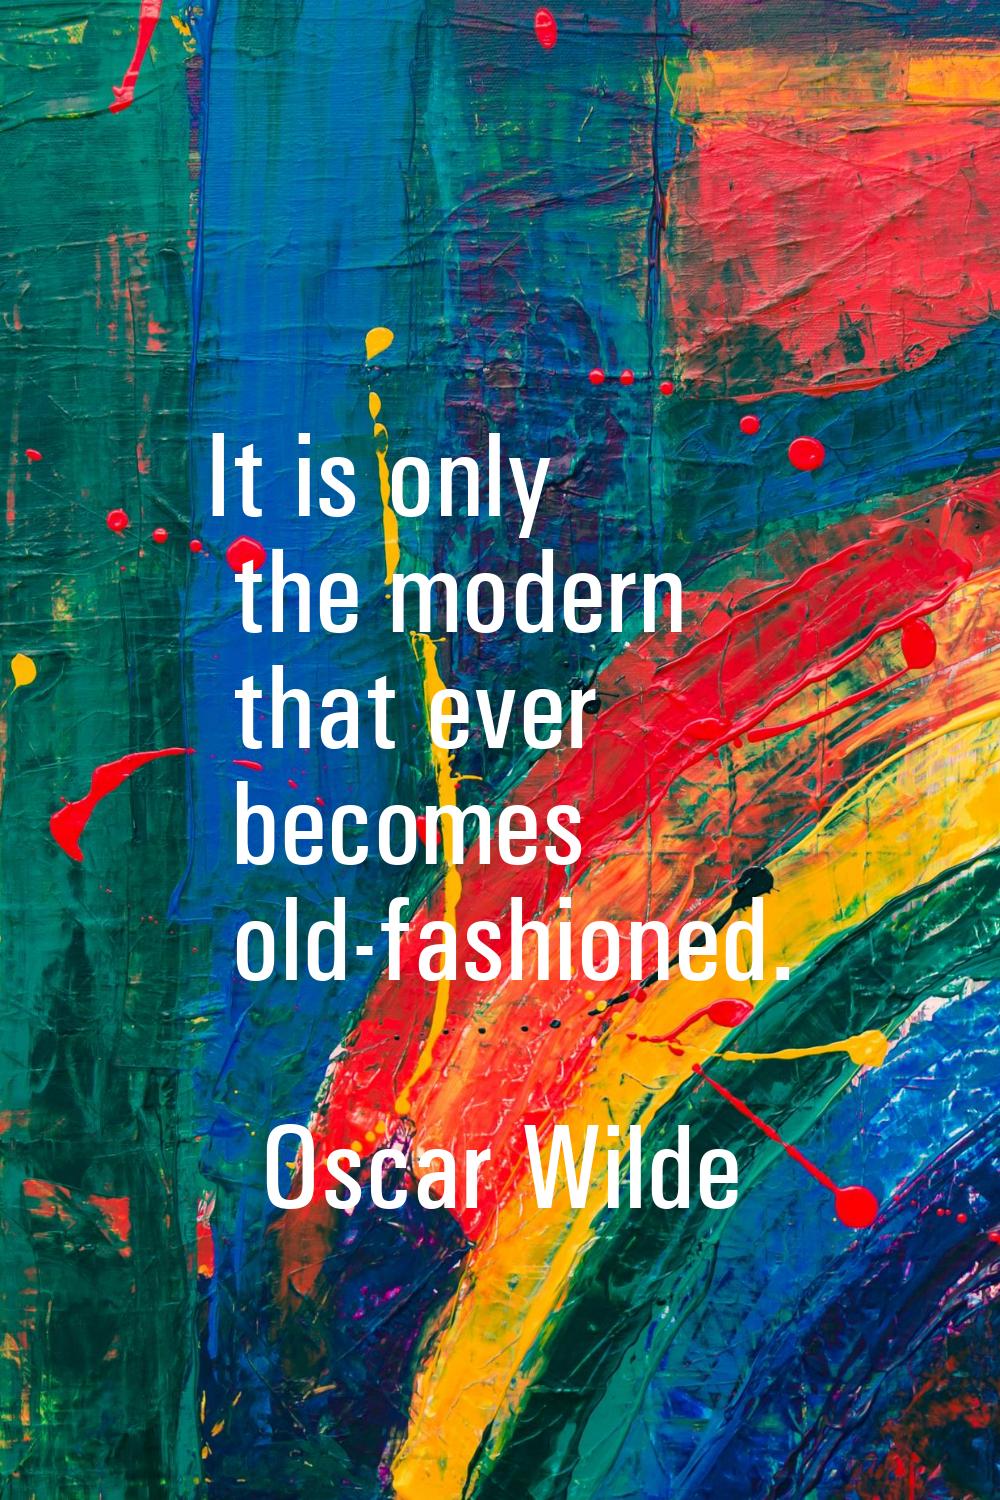 It is only the modern that ever becomes old-fashioned.